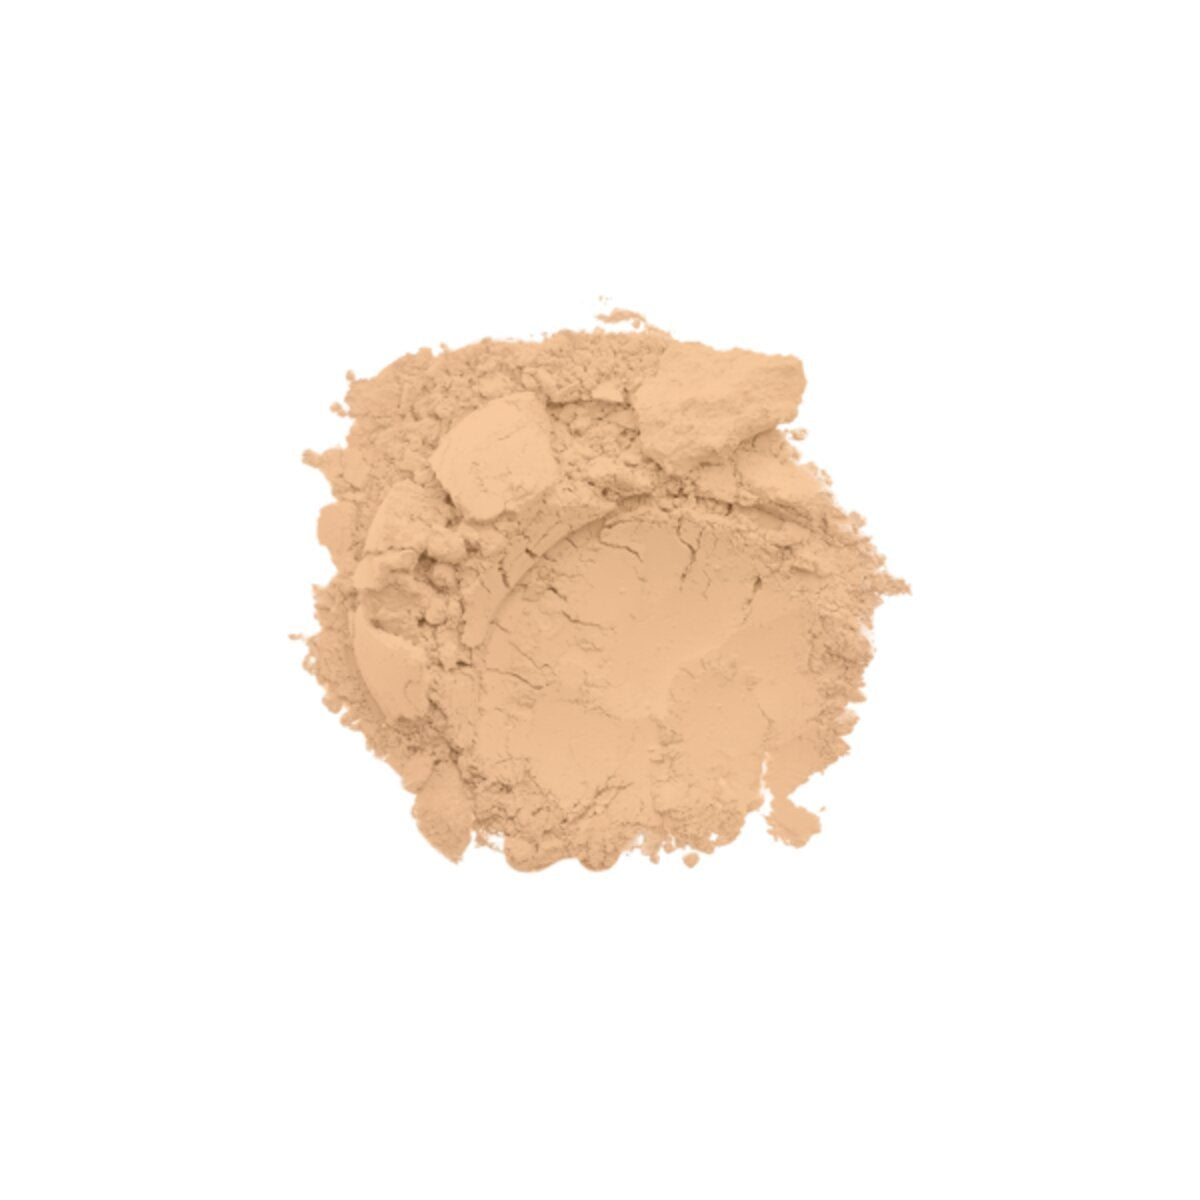 CONCEAL PERFECT SHINE PROOF POWDER NATURAL LIGHT - MILANI